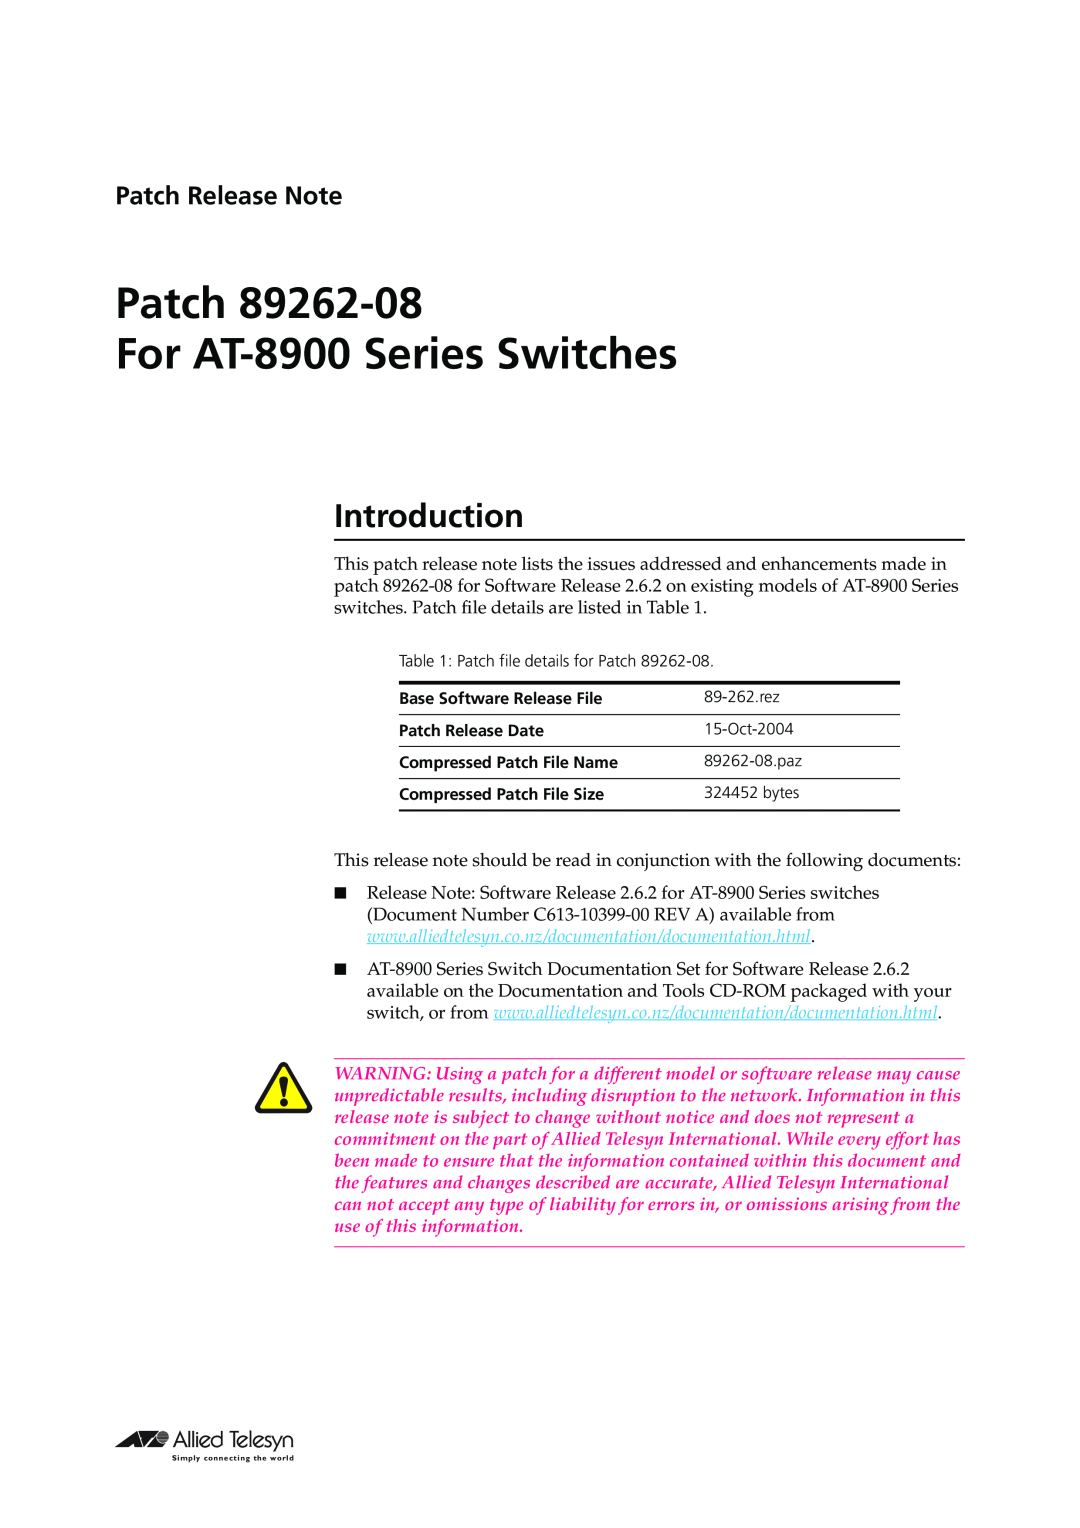 Allied Telesis Patch 89262-08 manual Introduction, Patch Release Note, Patch For AT-8900 Series Switches 